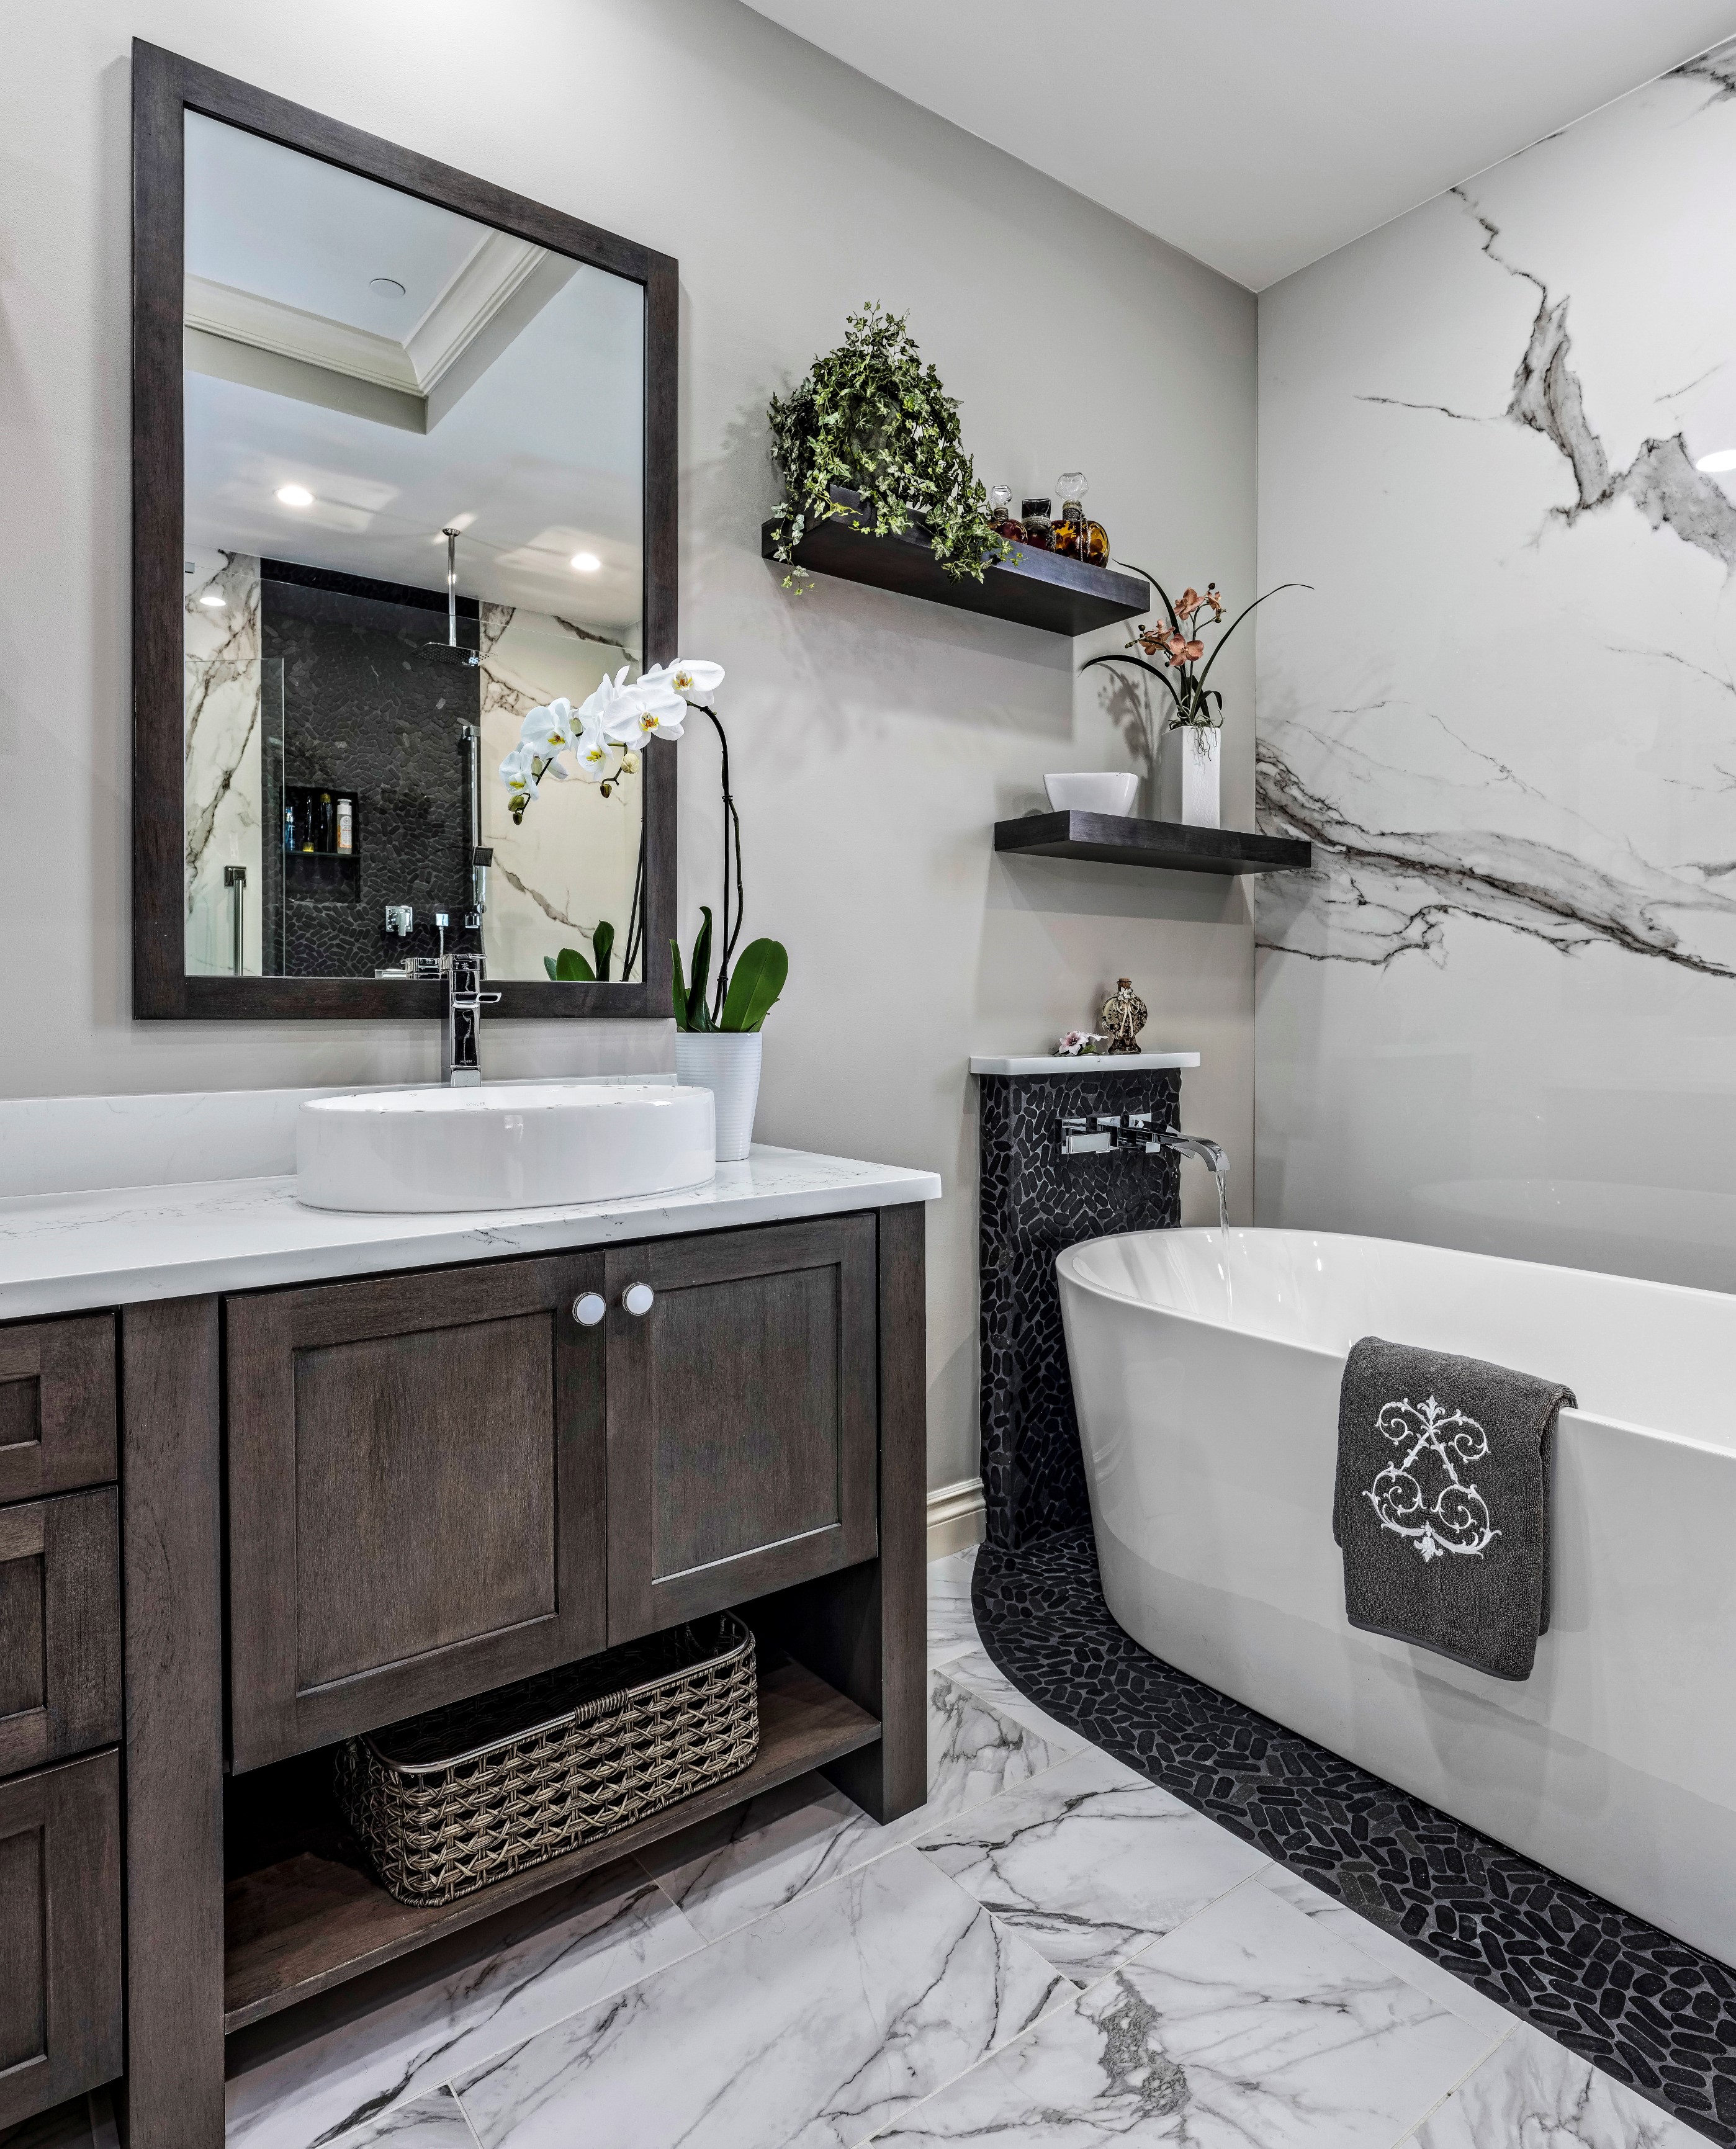 How Much Does Bathroom Remodeling Typically Cost Colorado Springs Dreammaker Bath Kitchen - What Permits Do I Need To Remodel My Bathroom